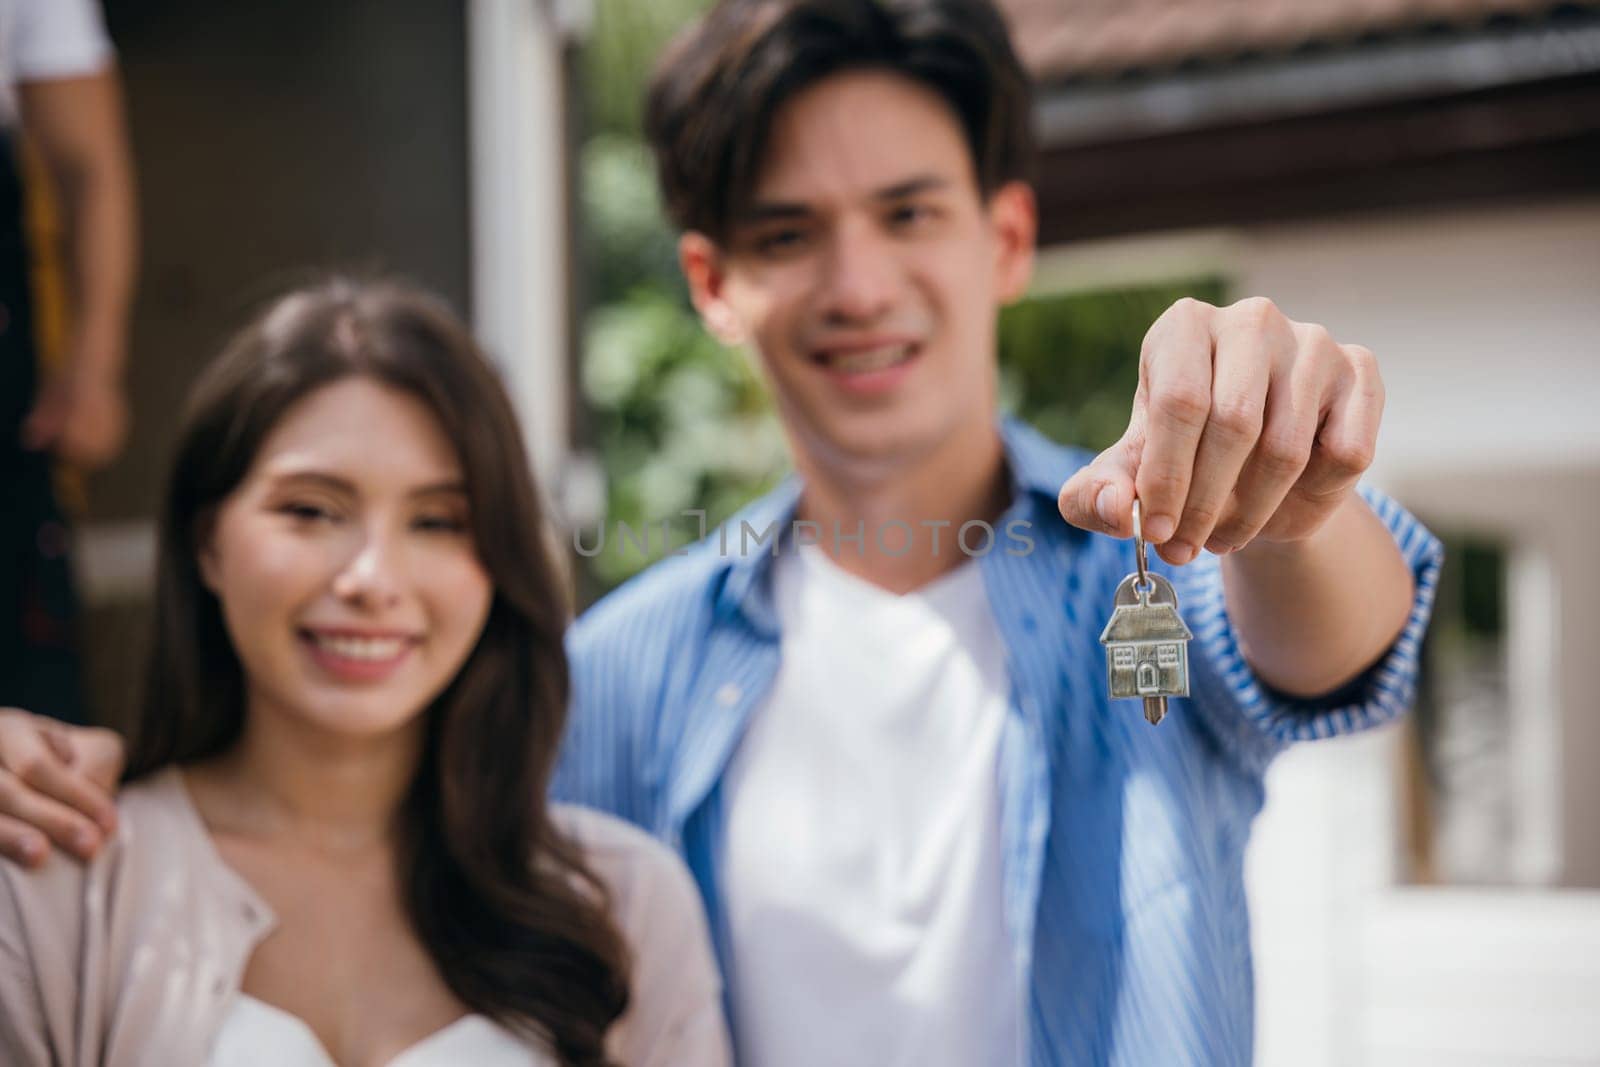 A couple happily displays keys carrying a mattress into their new home marking a triumphant relocation. The scene is filled with happiness. Moving Day Concept by Sorapop